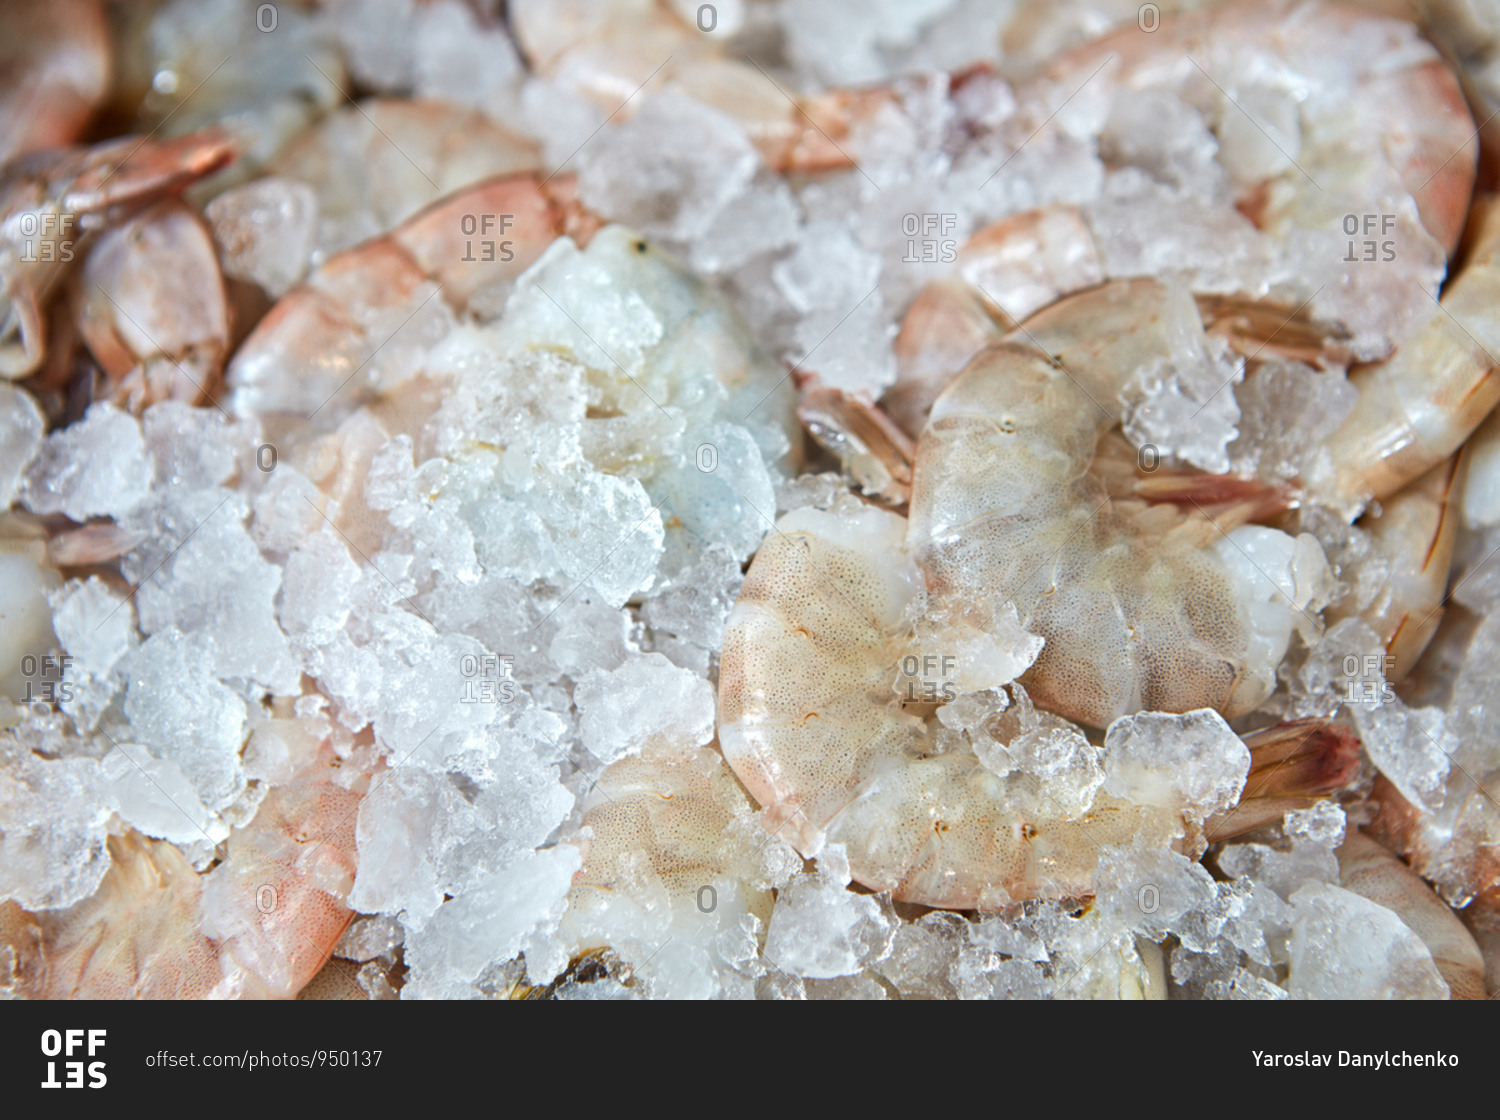 Fresh raw shrimp on ice close-up. Healthy Sea Food Selling Concept. Top view